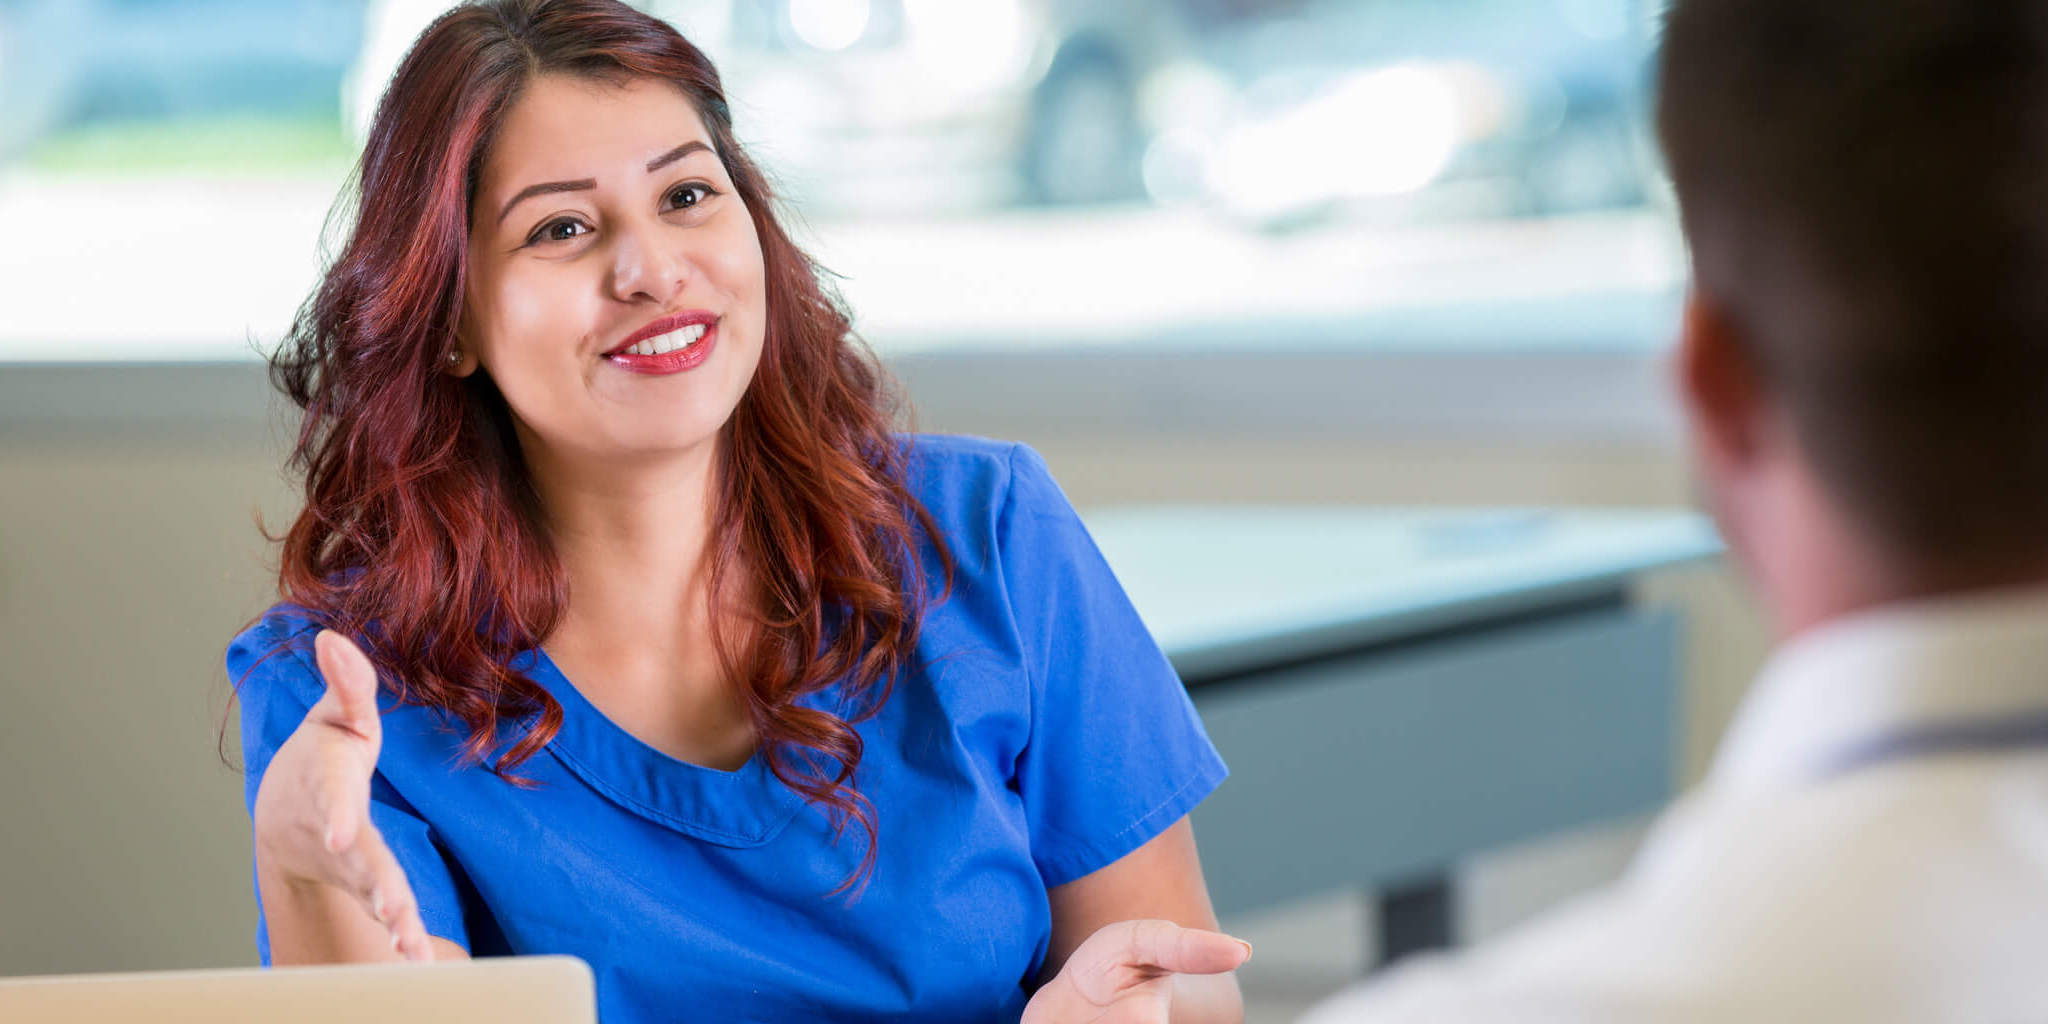 7 Qualities the Best Nurses Have in Common